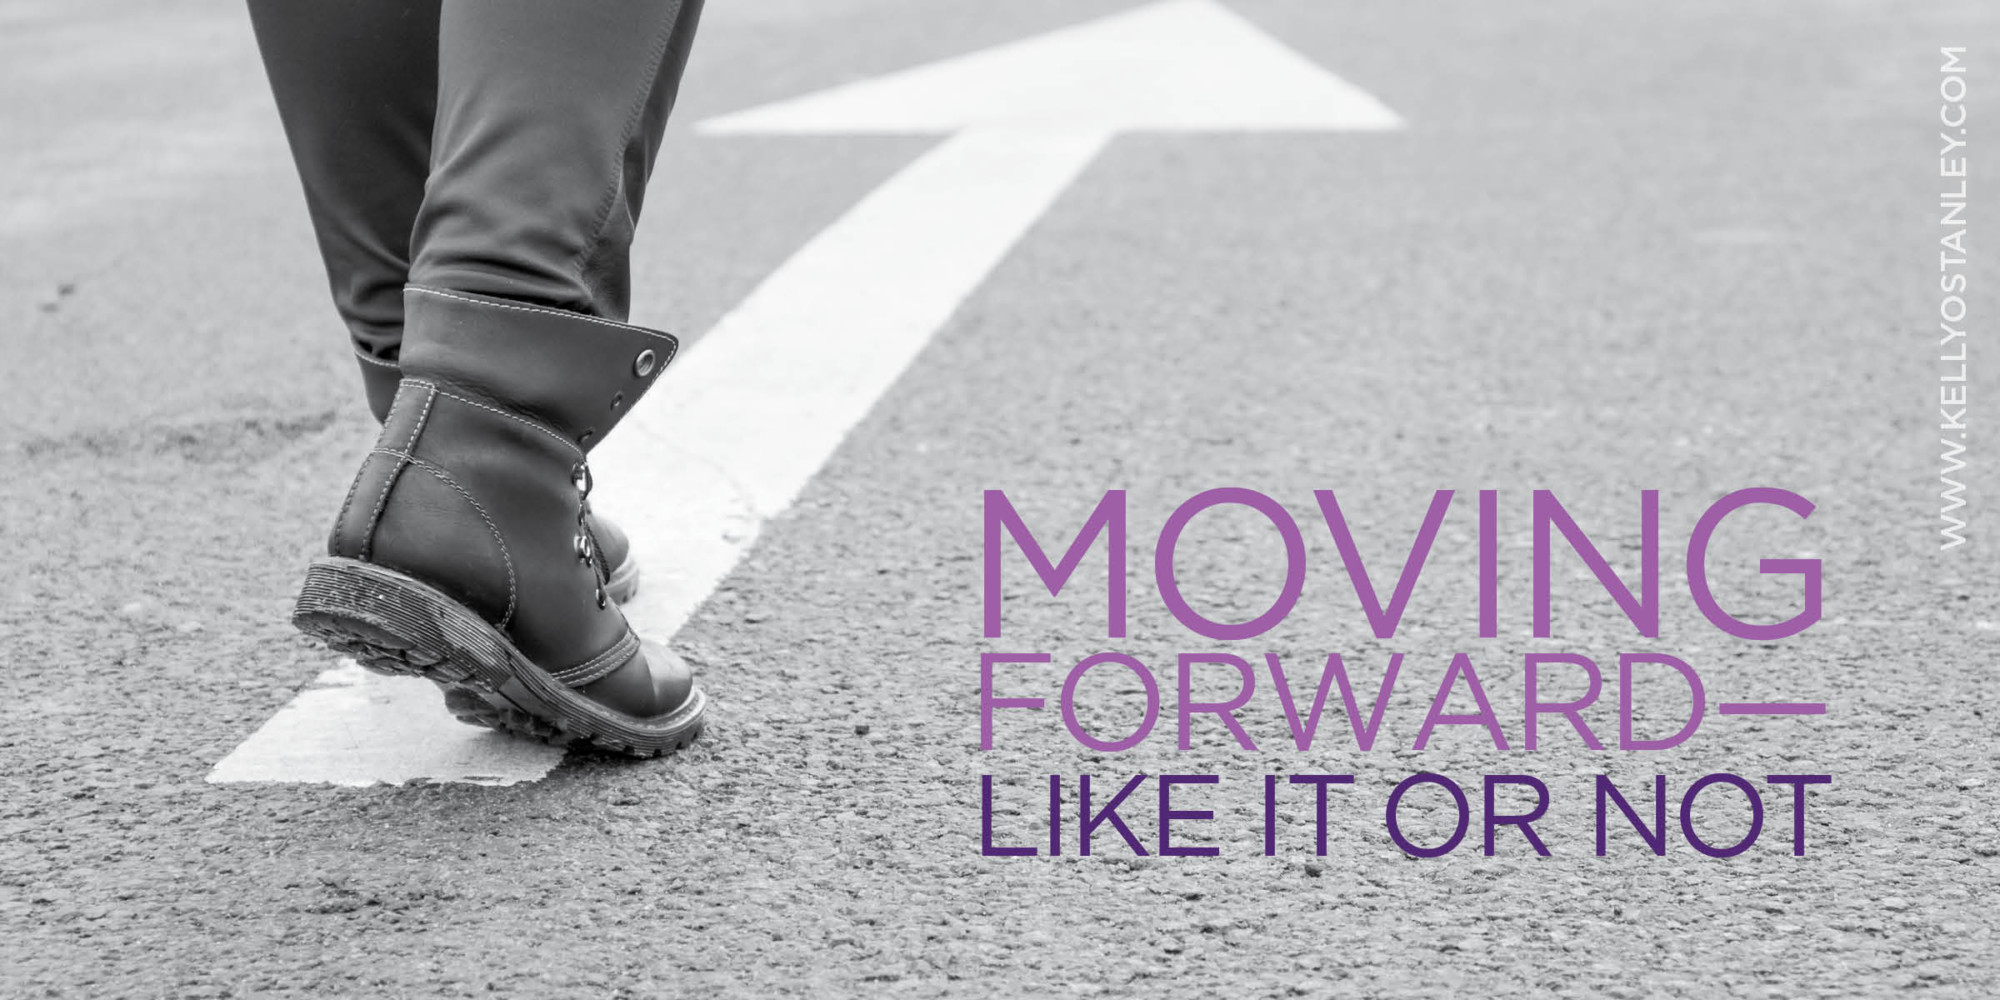 Move forward. Move ahead. Moving Words. Press w to move forward. Мув форвард